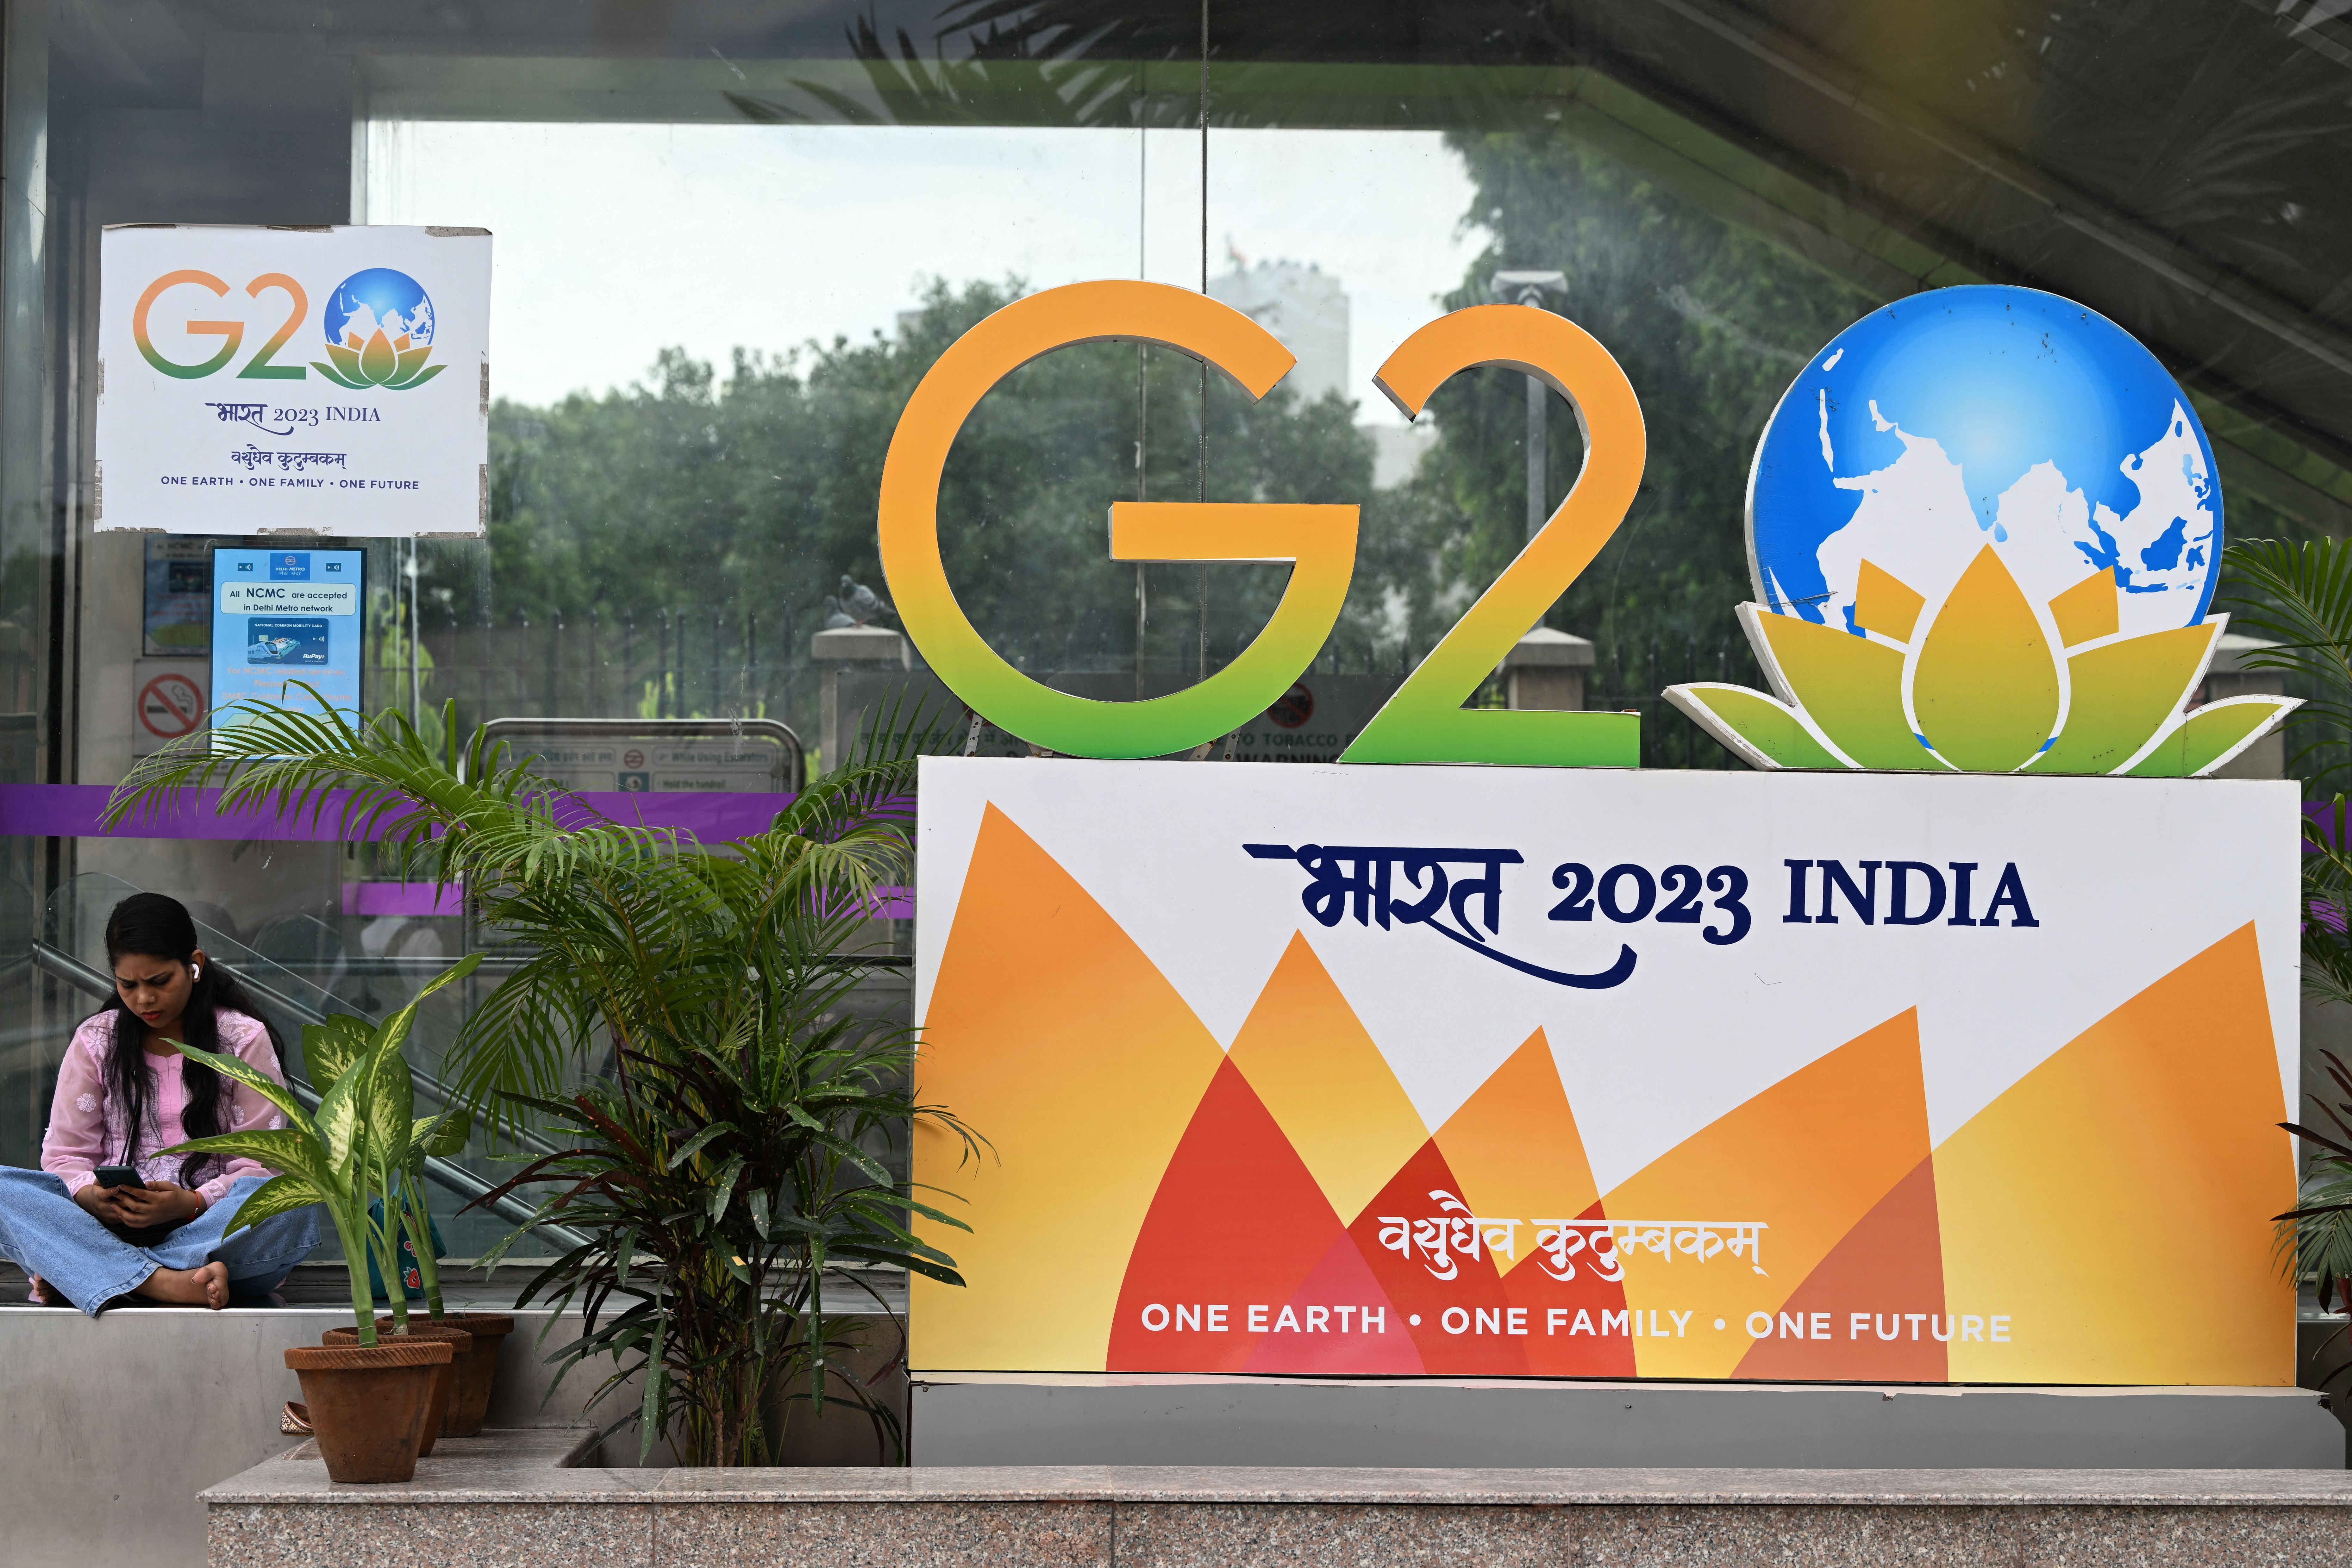 This year’s G20 logo is an image of a globe inside a lotus, using the colours of the Indian flag